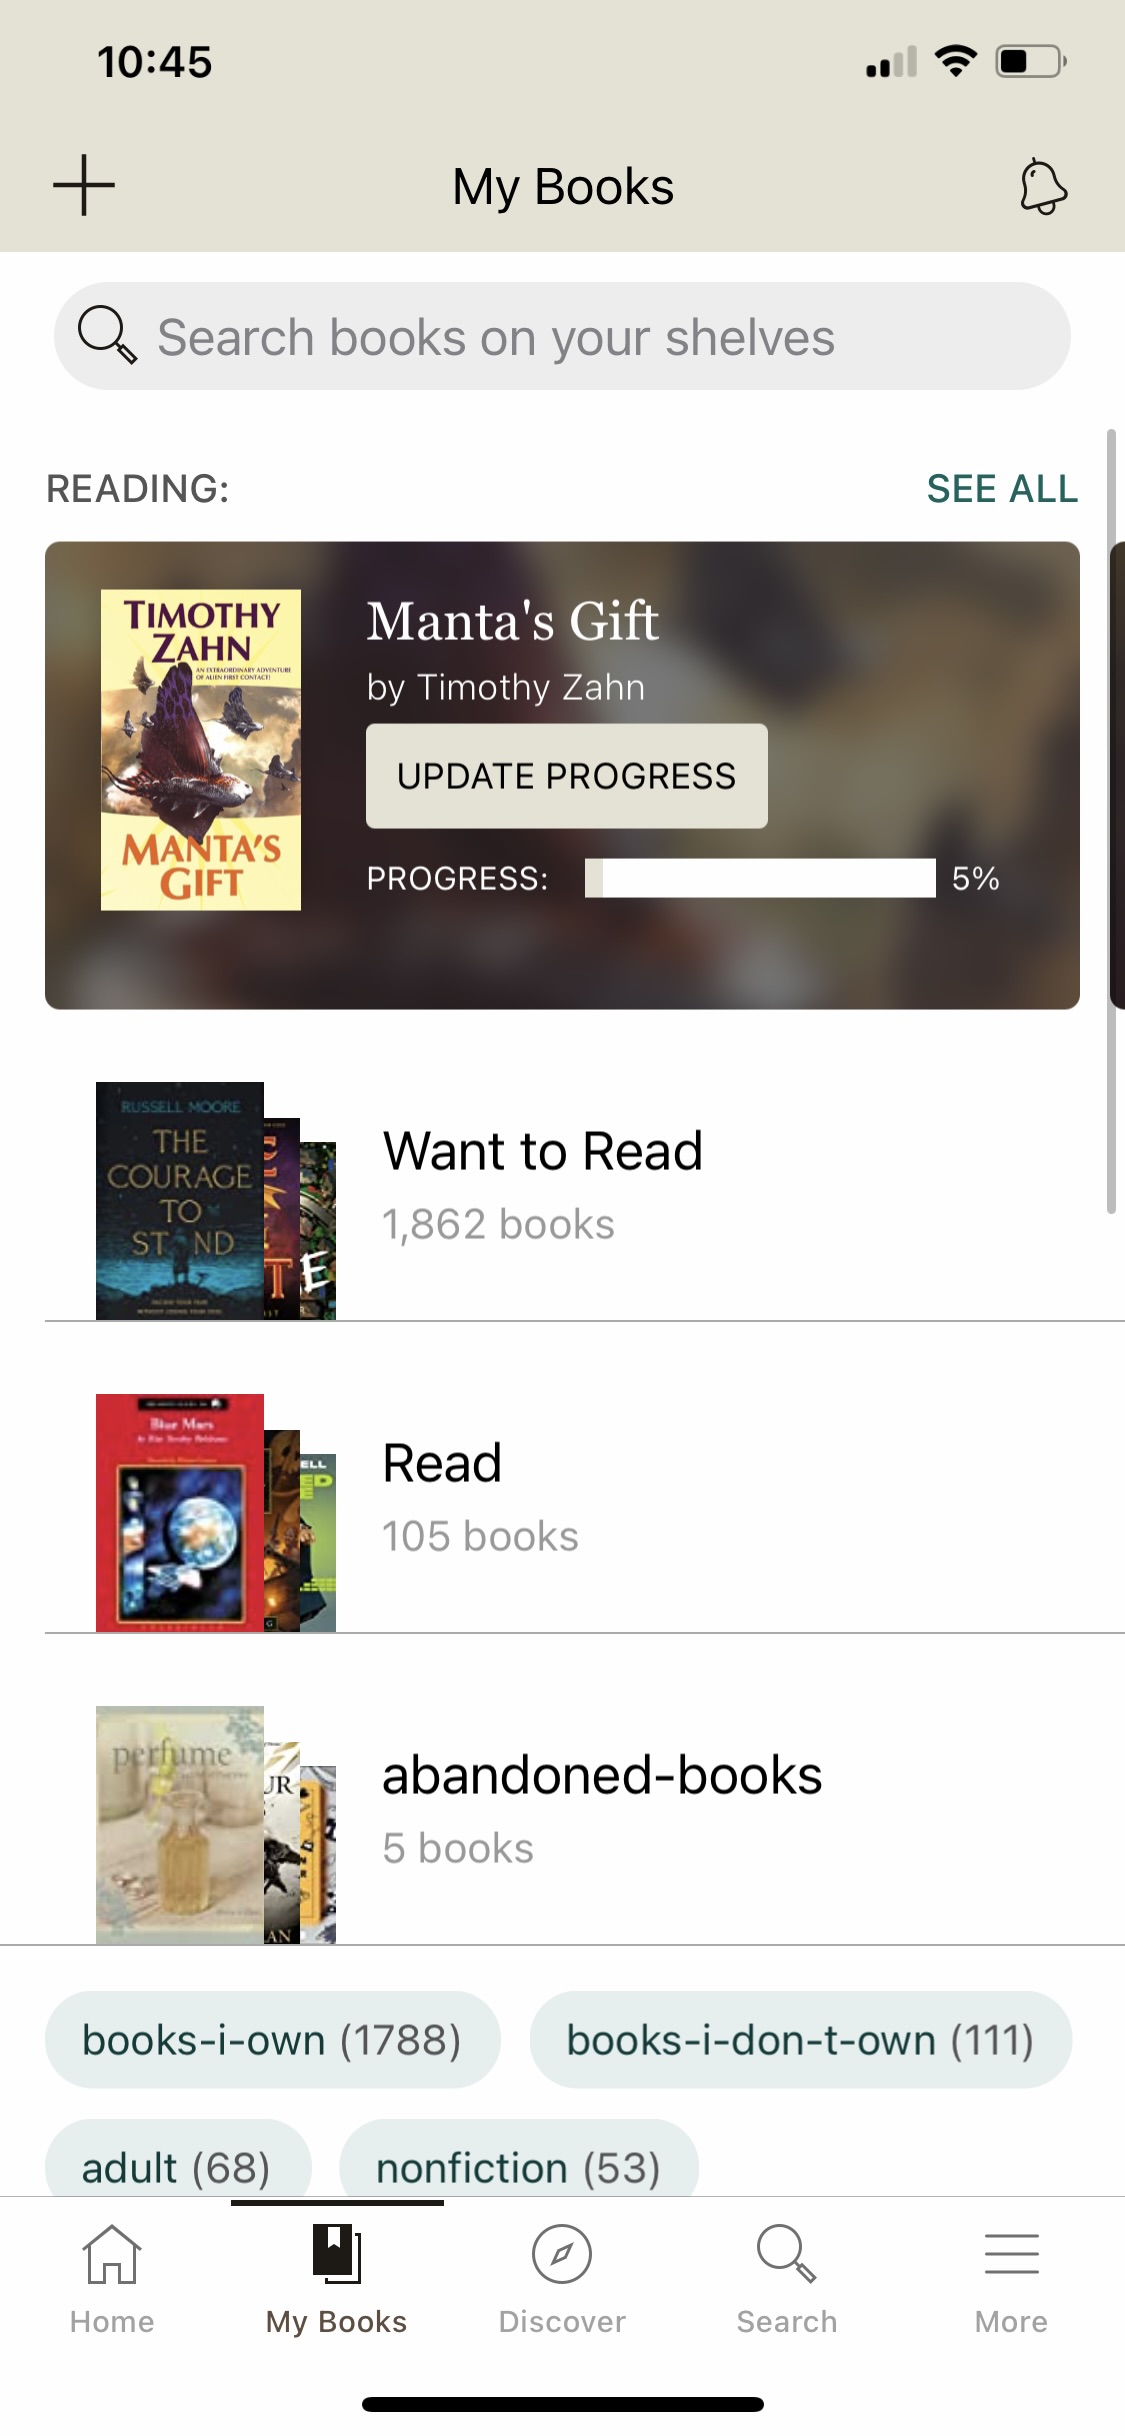 Book-Tracking Apps, Part III (Goodreads)